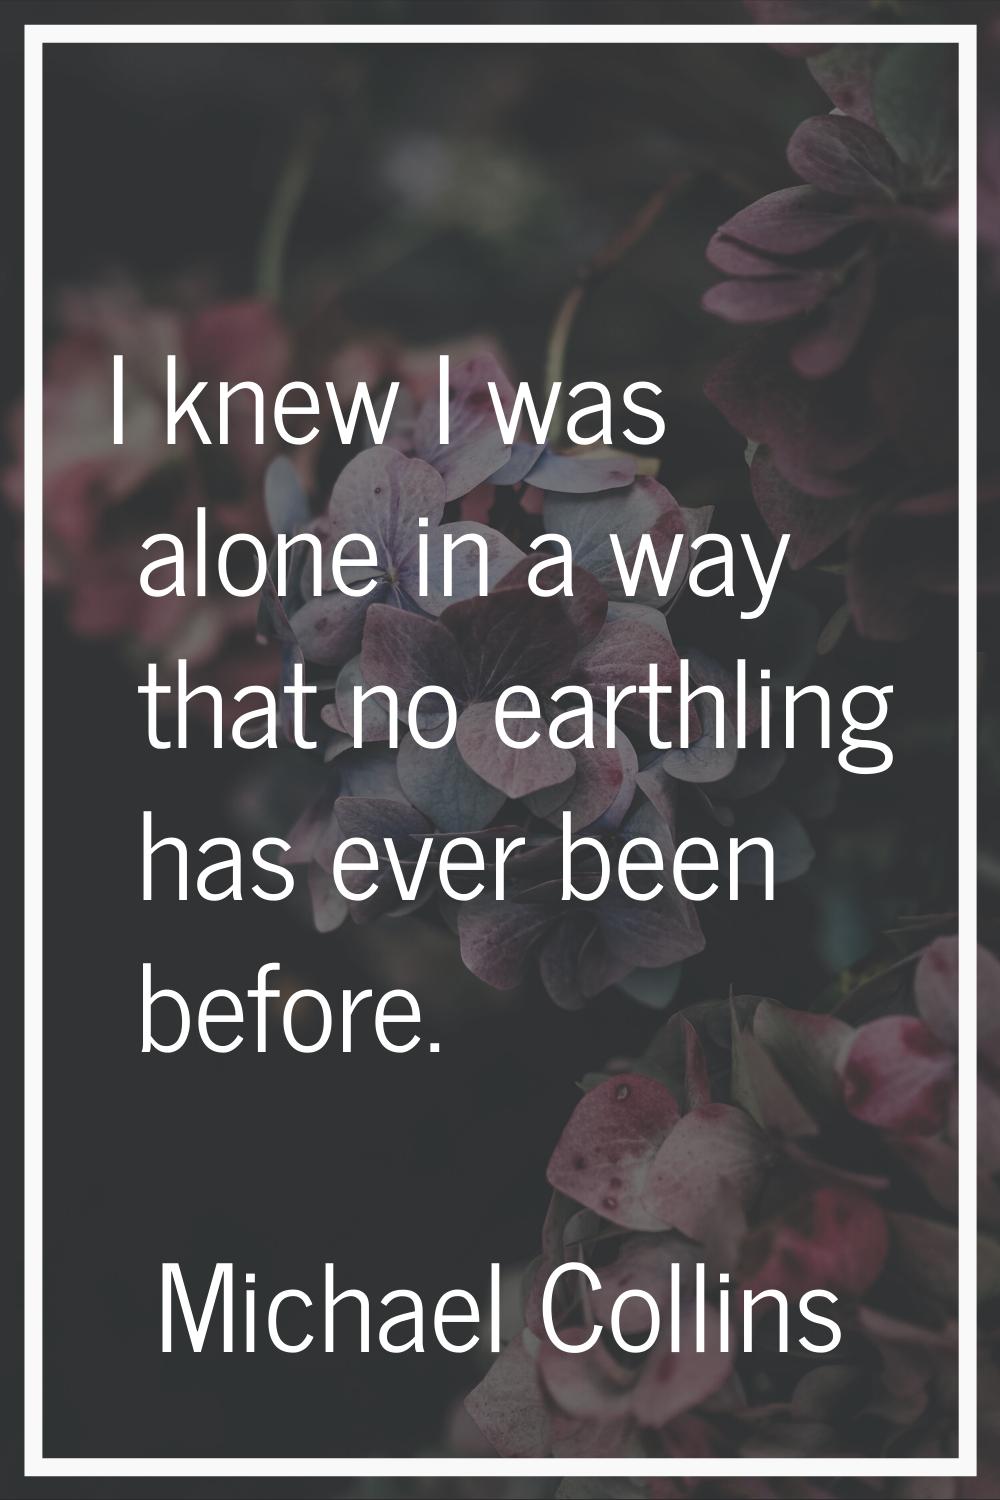 I knew I was alone in a way that no earthling has ever been before.